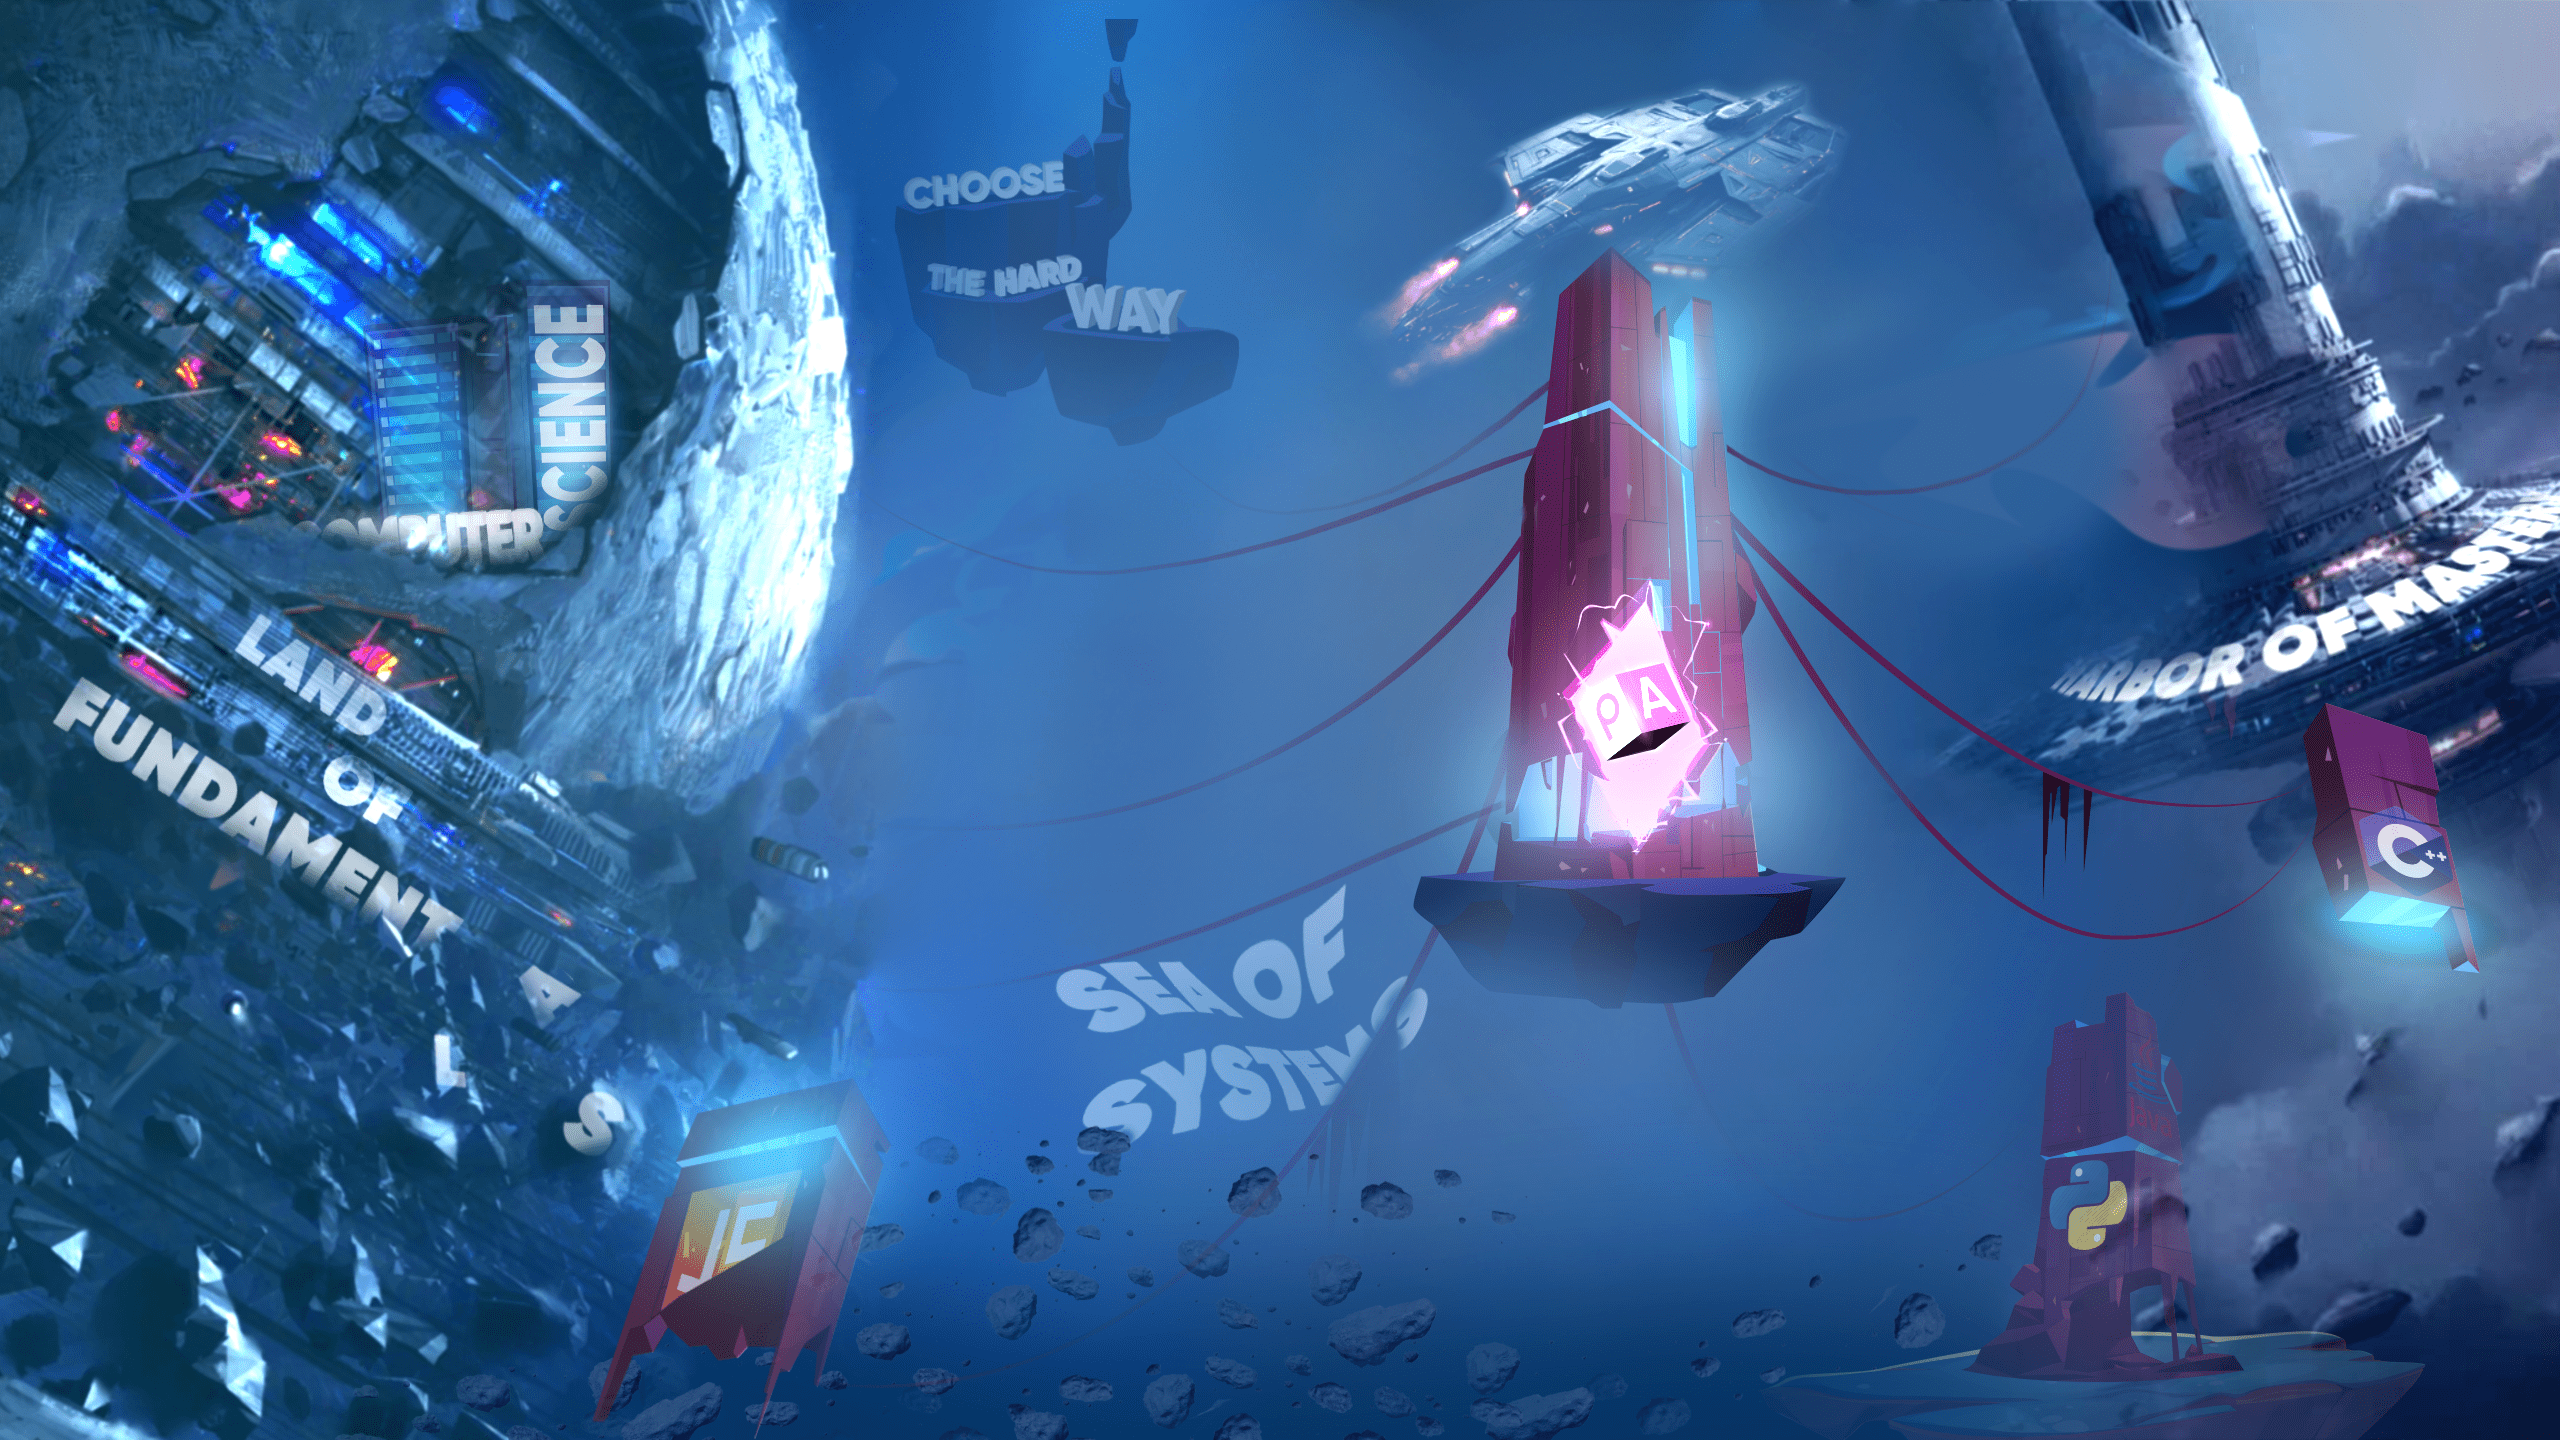 Futuristic digital landscape with floating islands labeled 'Computer Science', 'Land of Fundamentals', and 'Harbor of Mastery', surrounded by spaceships, floating text messages, and digital towers.